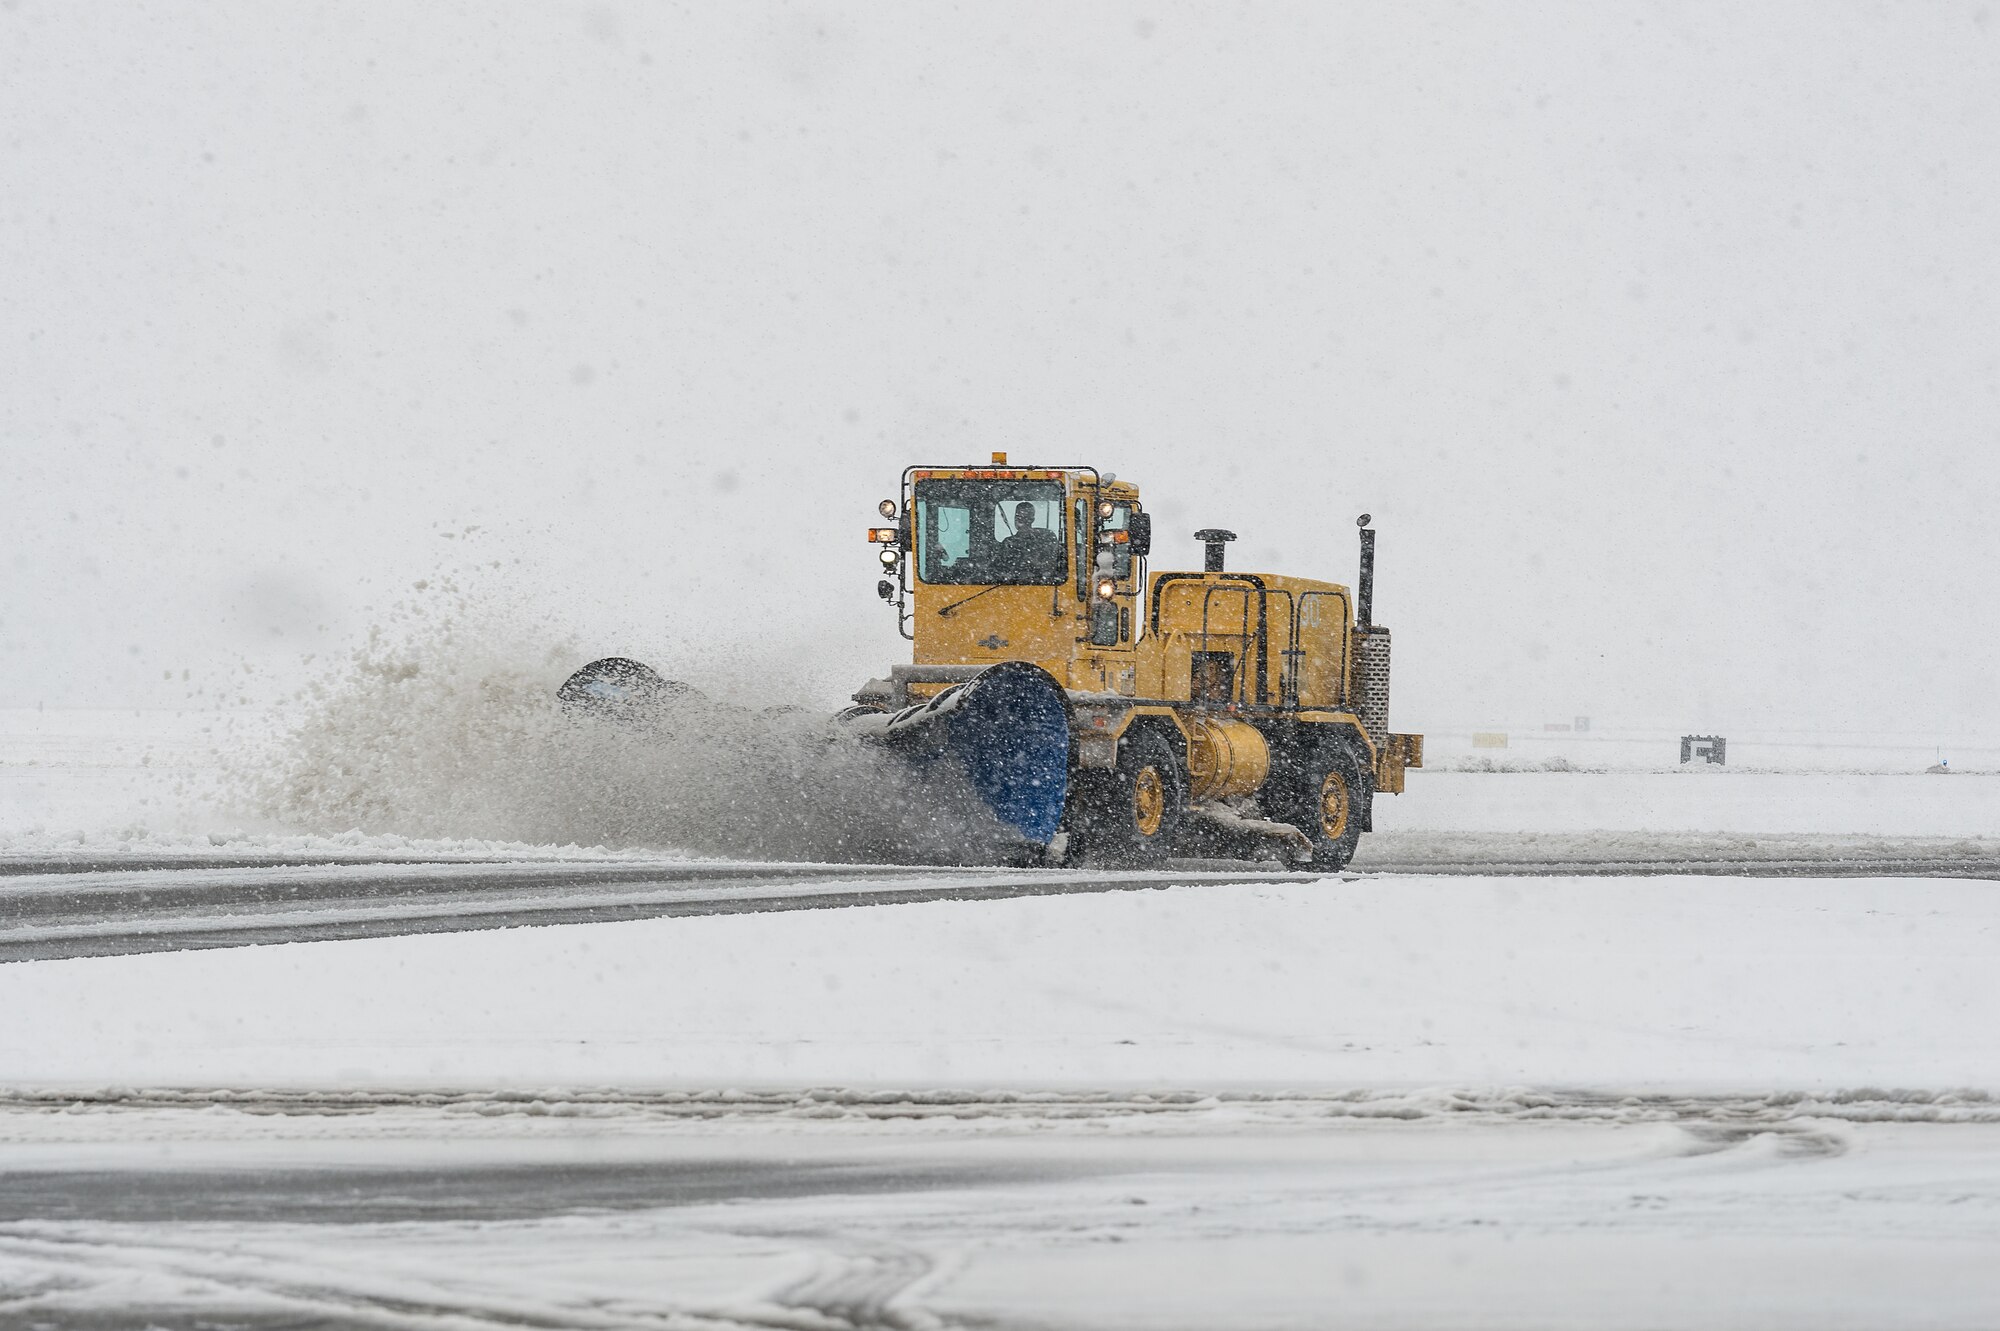 A 436th Civil Engineer Squadron snowplow clears snow from the flight line at Dover Air Force Base, Delaware, Feb. 11, 2021. As Winter Storm Roland produced a wintry mix of precipitation, the base continued normal operations and prepared for additional forecast snowfall. (U.S. Air Force photo by Roland Balik)